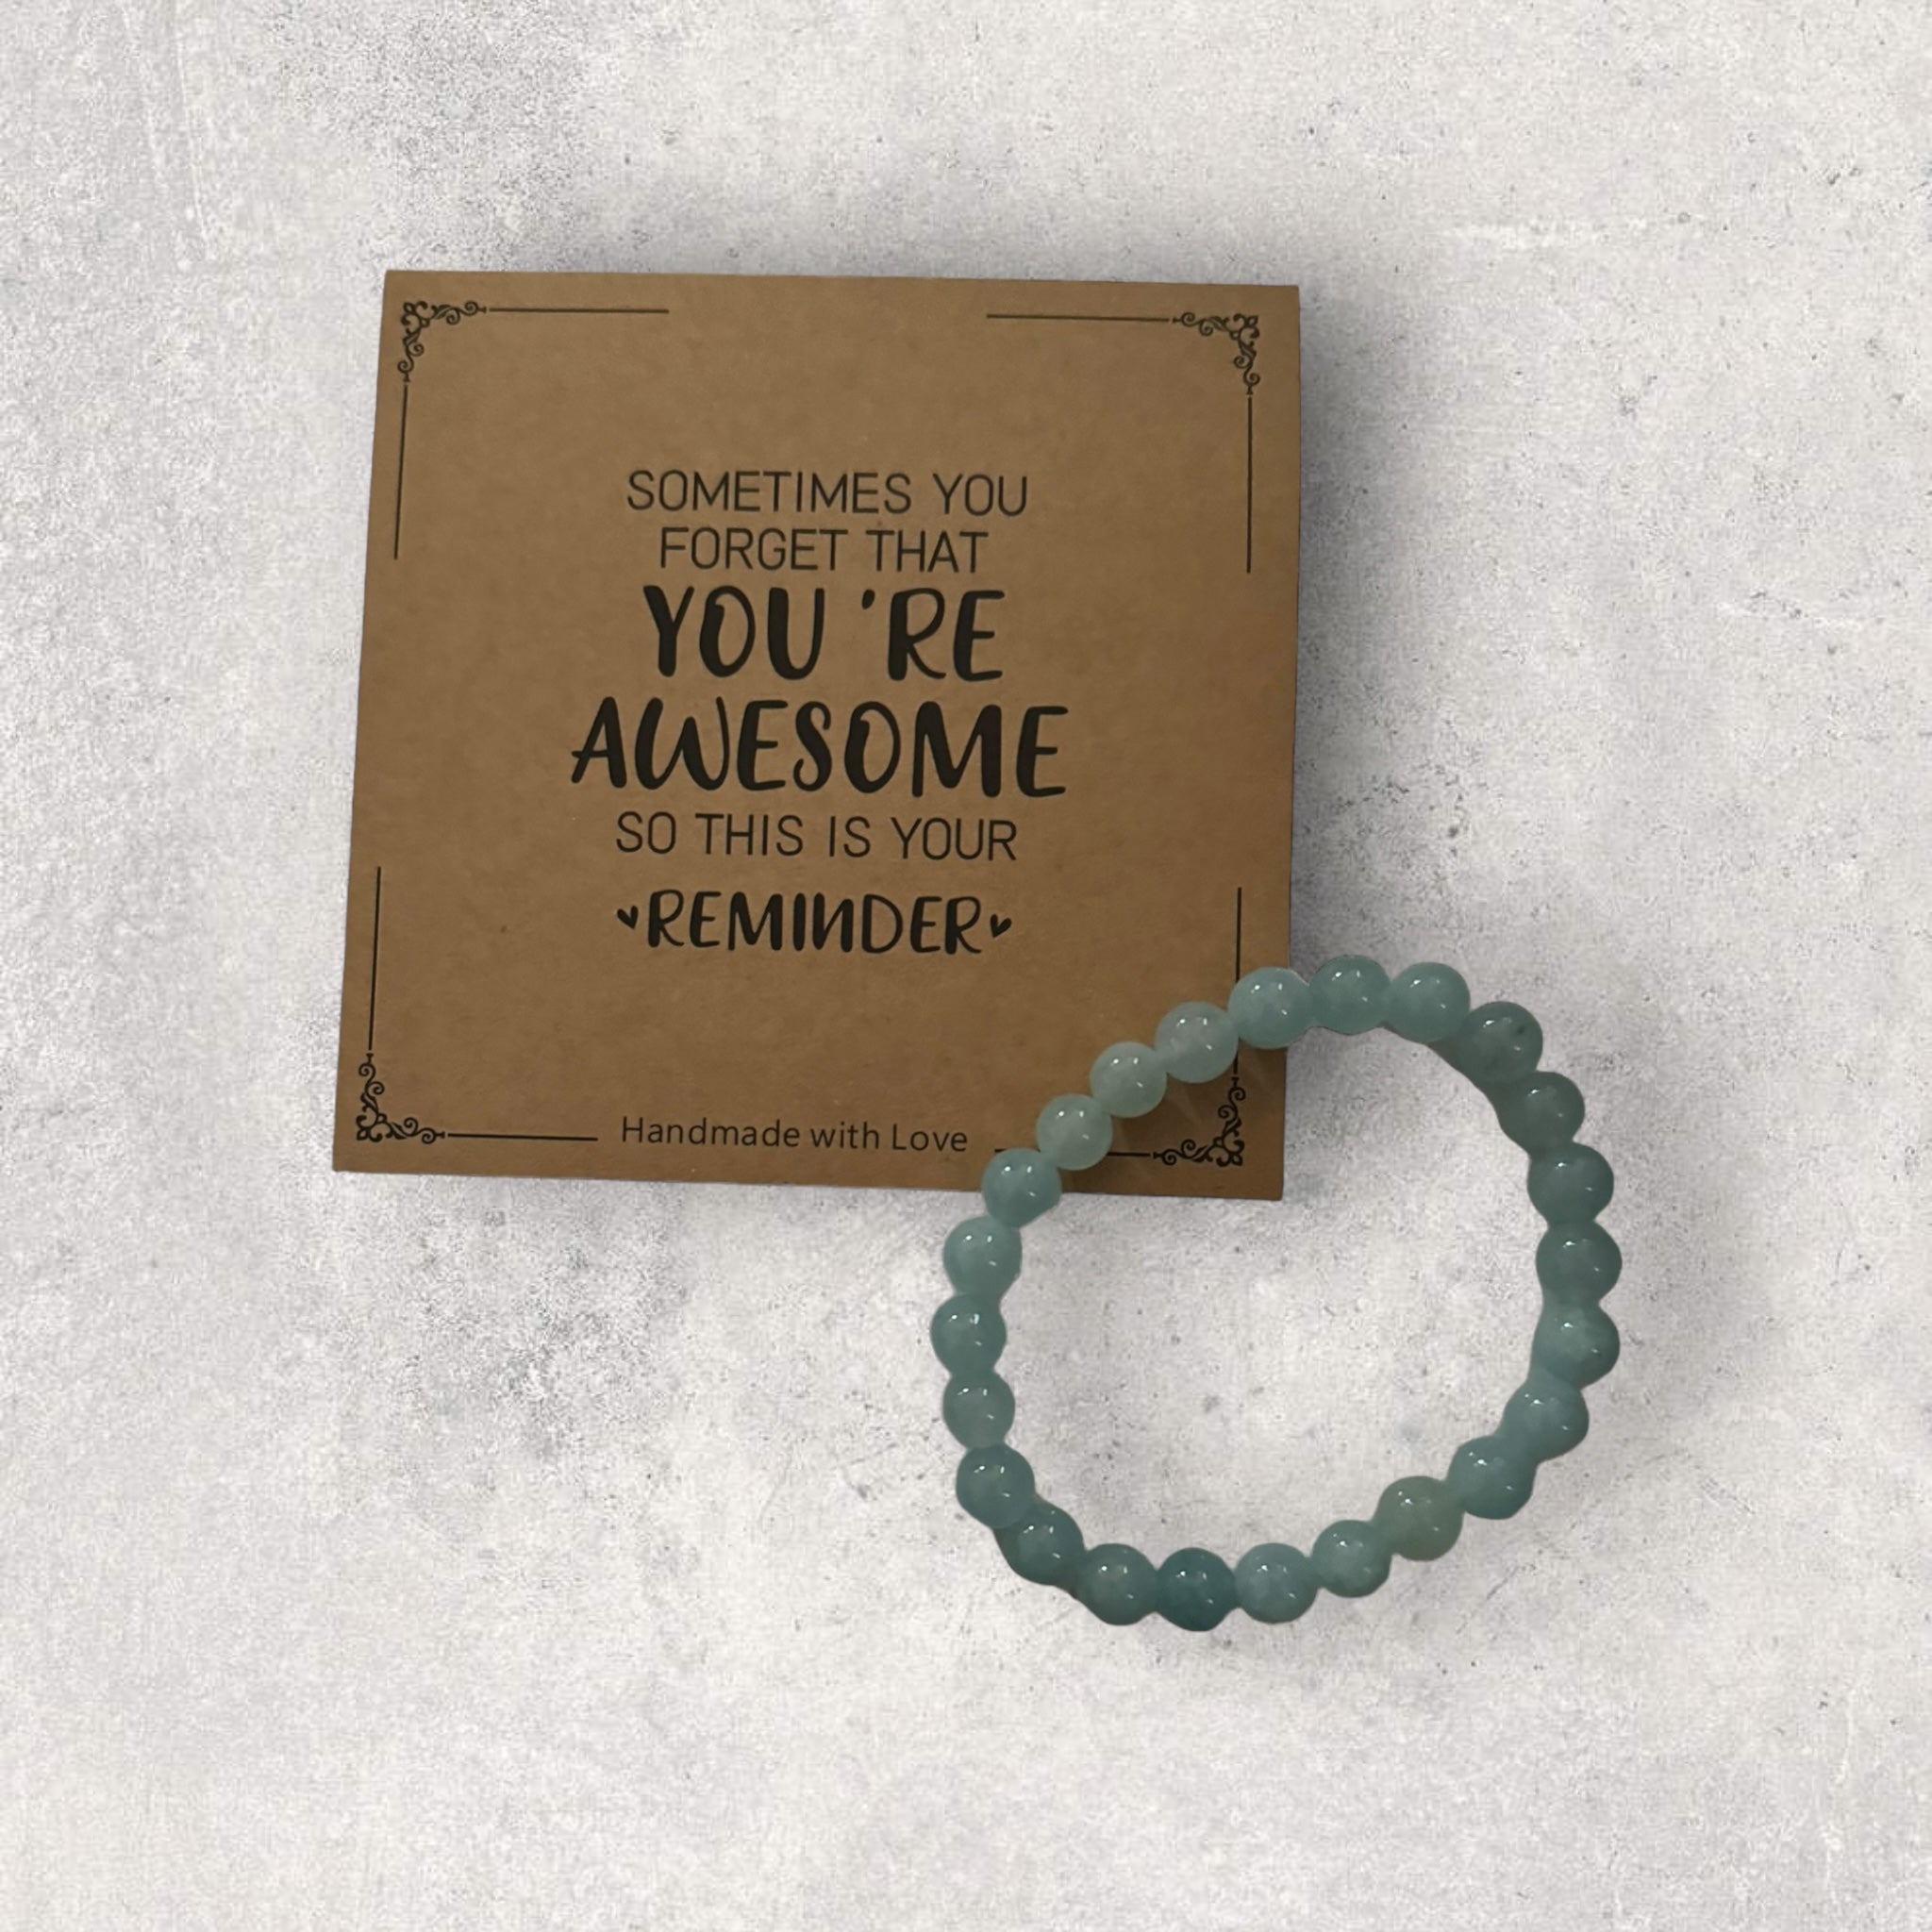 You’re Awesome Stone Bracelet Gift